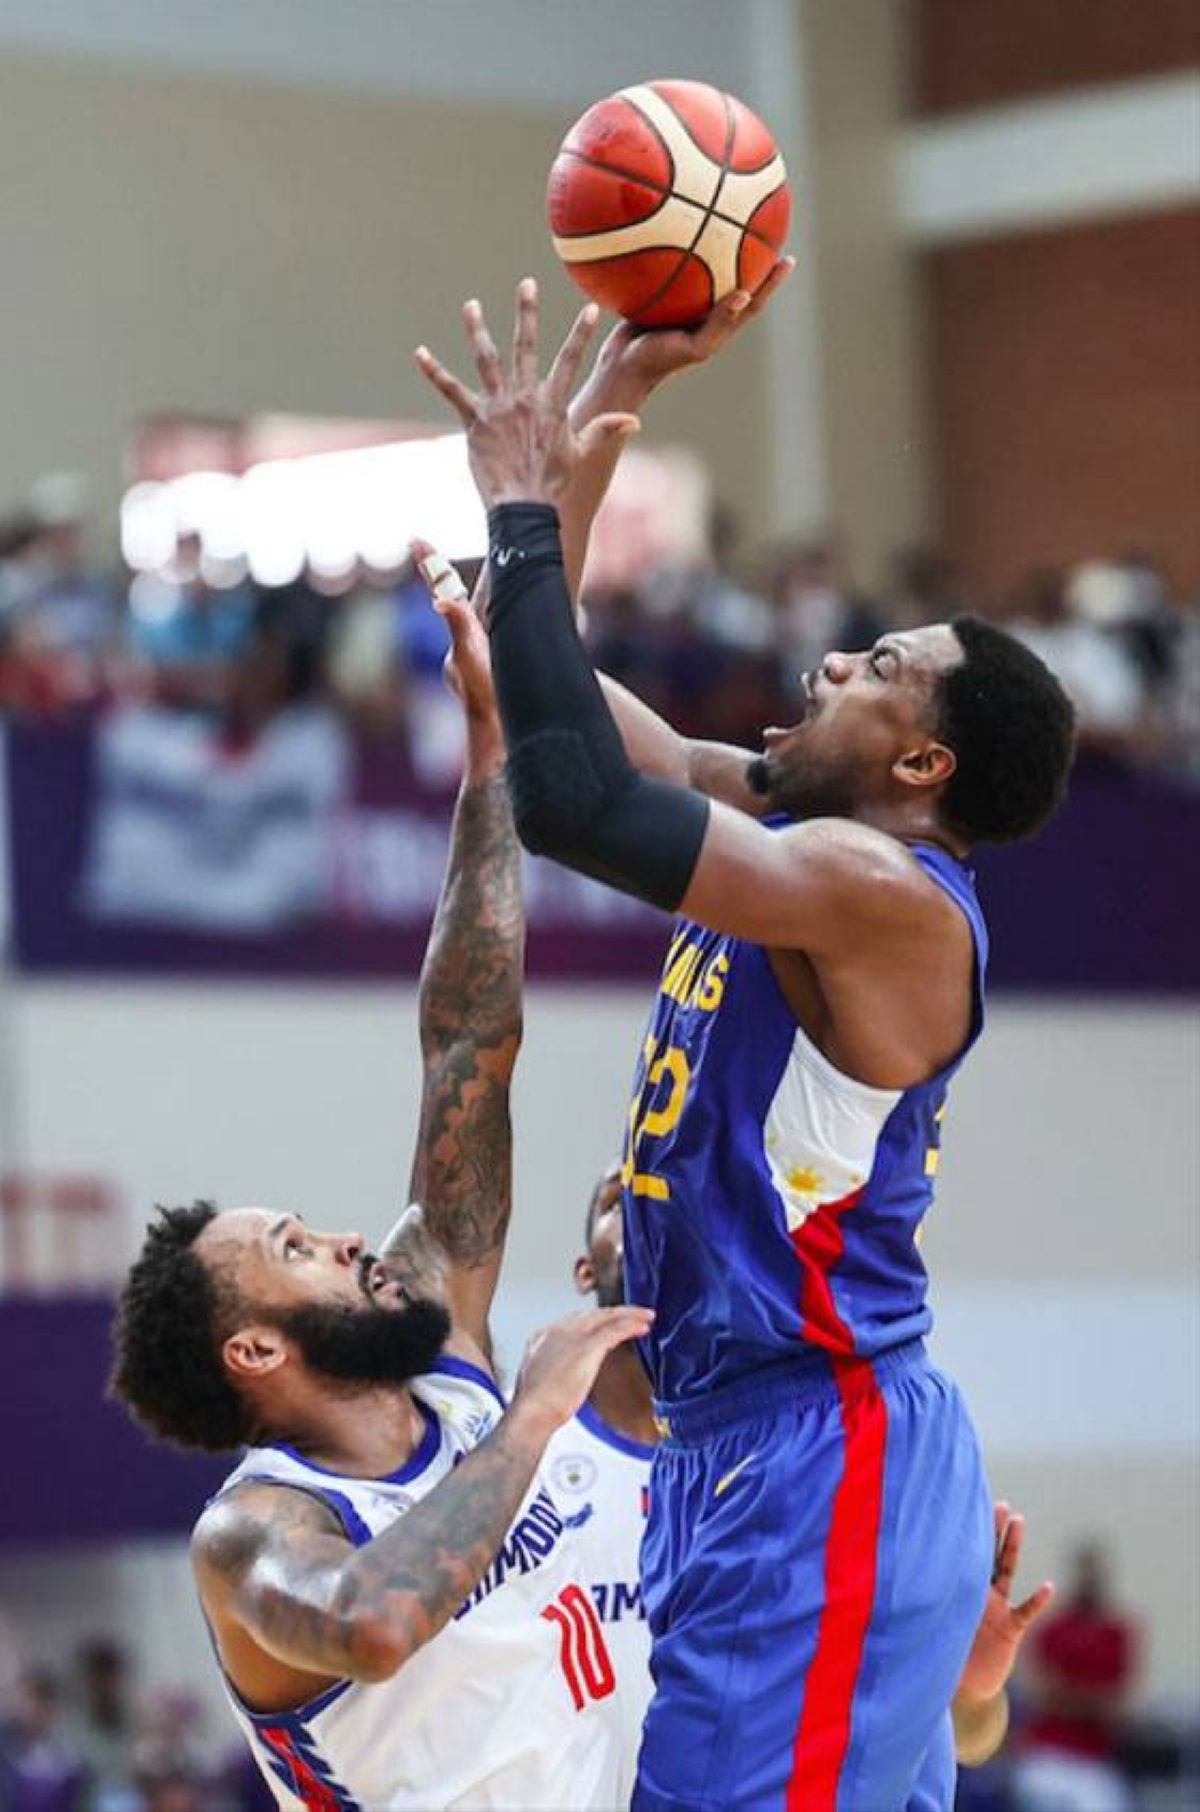 Justin Brownlee shoots over a Cambodian player during the 32nd Southeast Asian Games men’s basketball finals on Tuesday, May 16, 2023, in Phnom Penh, Cambodia. PHOTO BY RIO DELUVIO